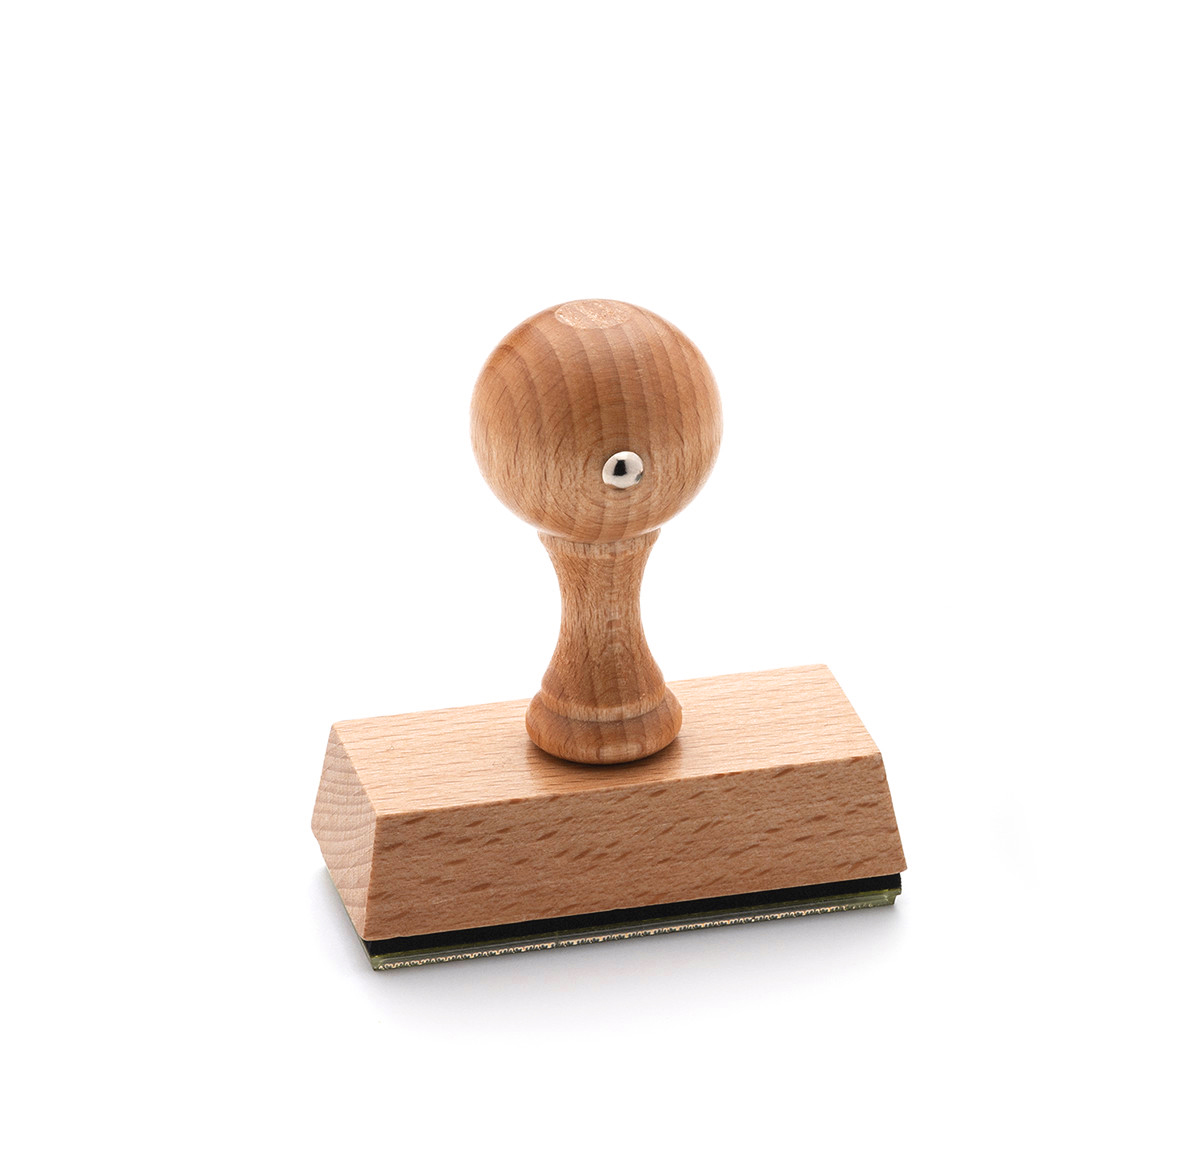 AD001 - Wood Handle Rubber Address Stamp